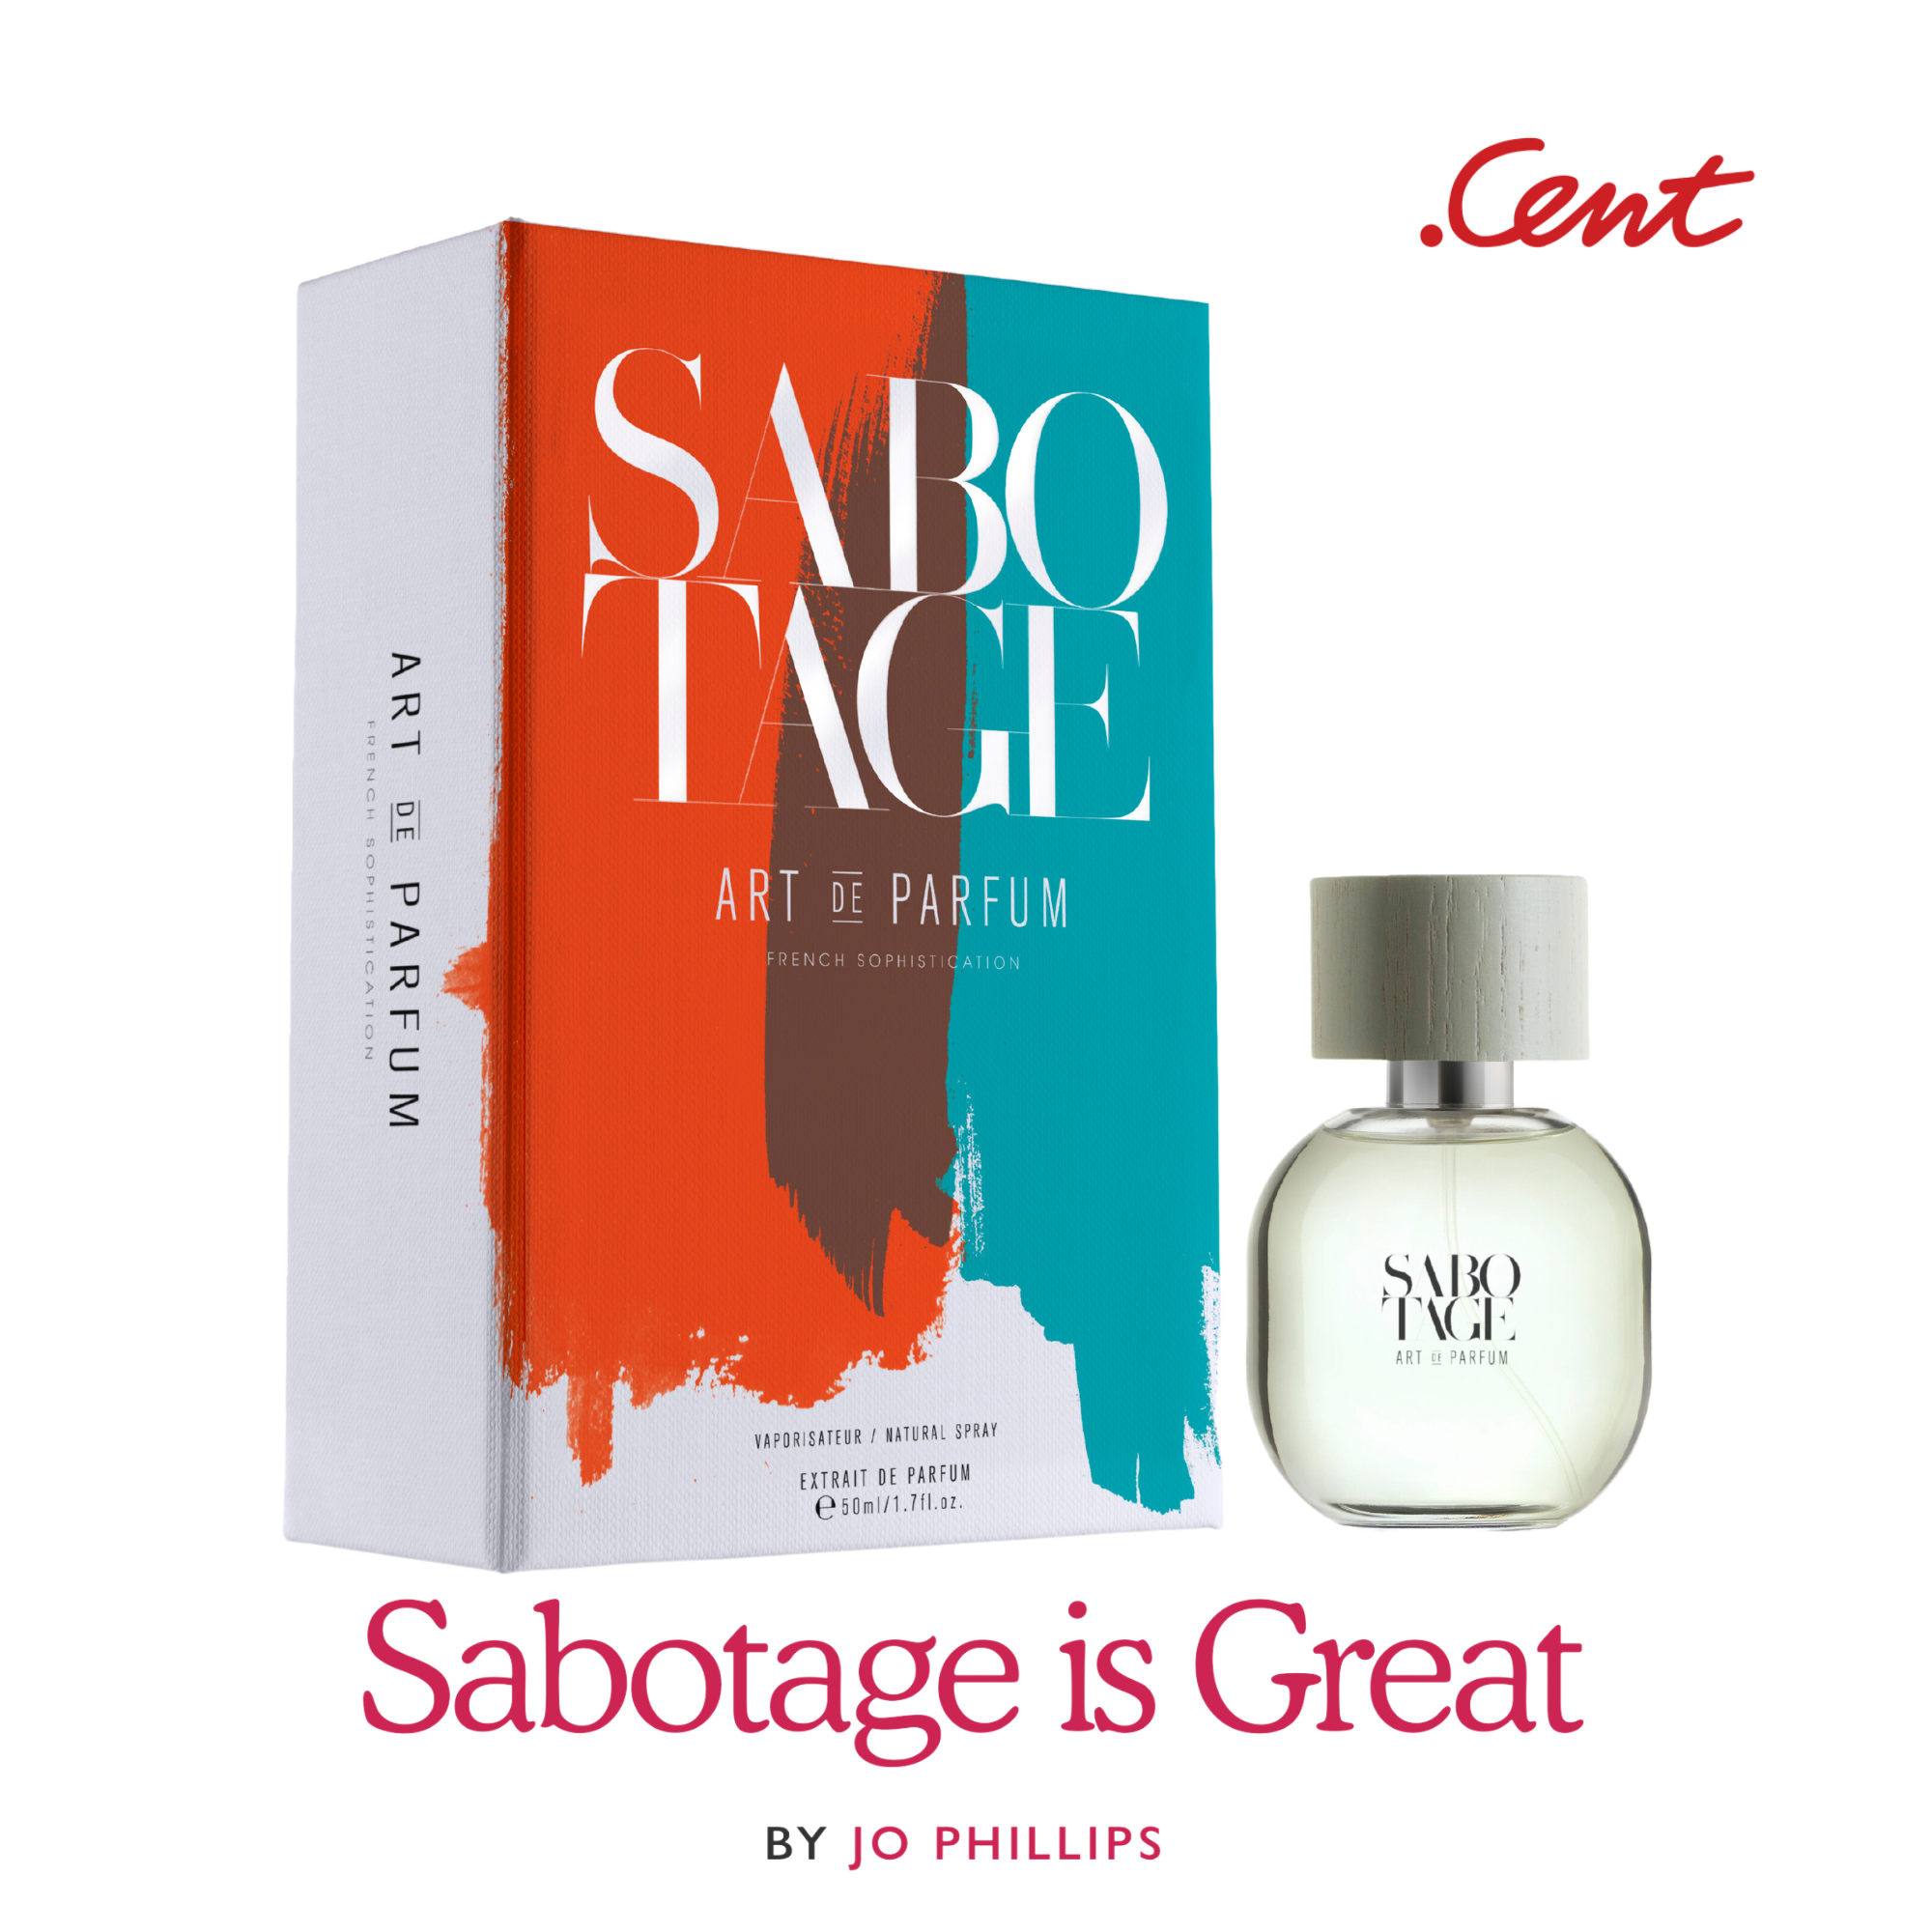 Sabotage Review written by Jo Phillips at CentMag